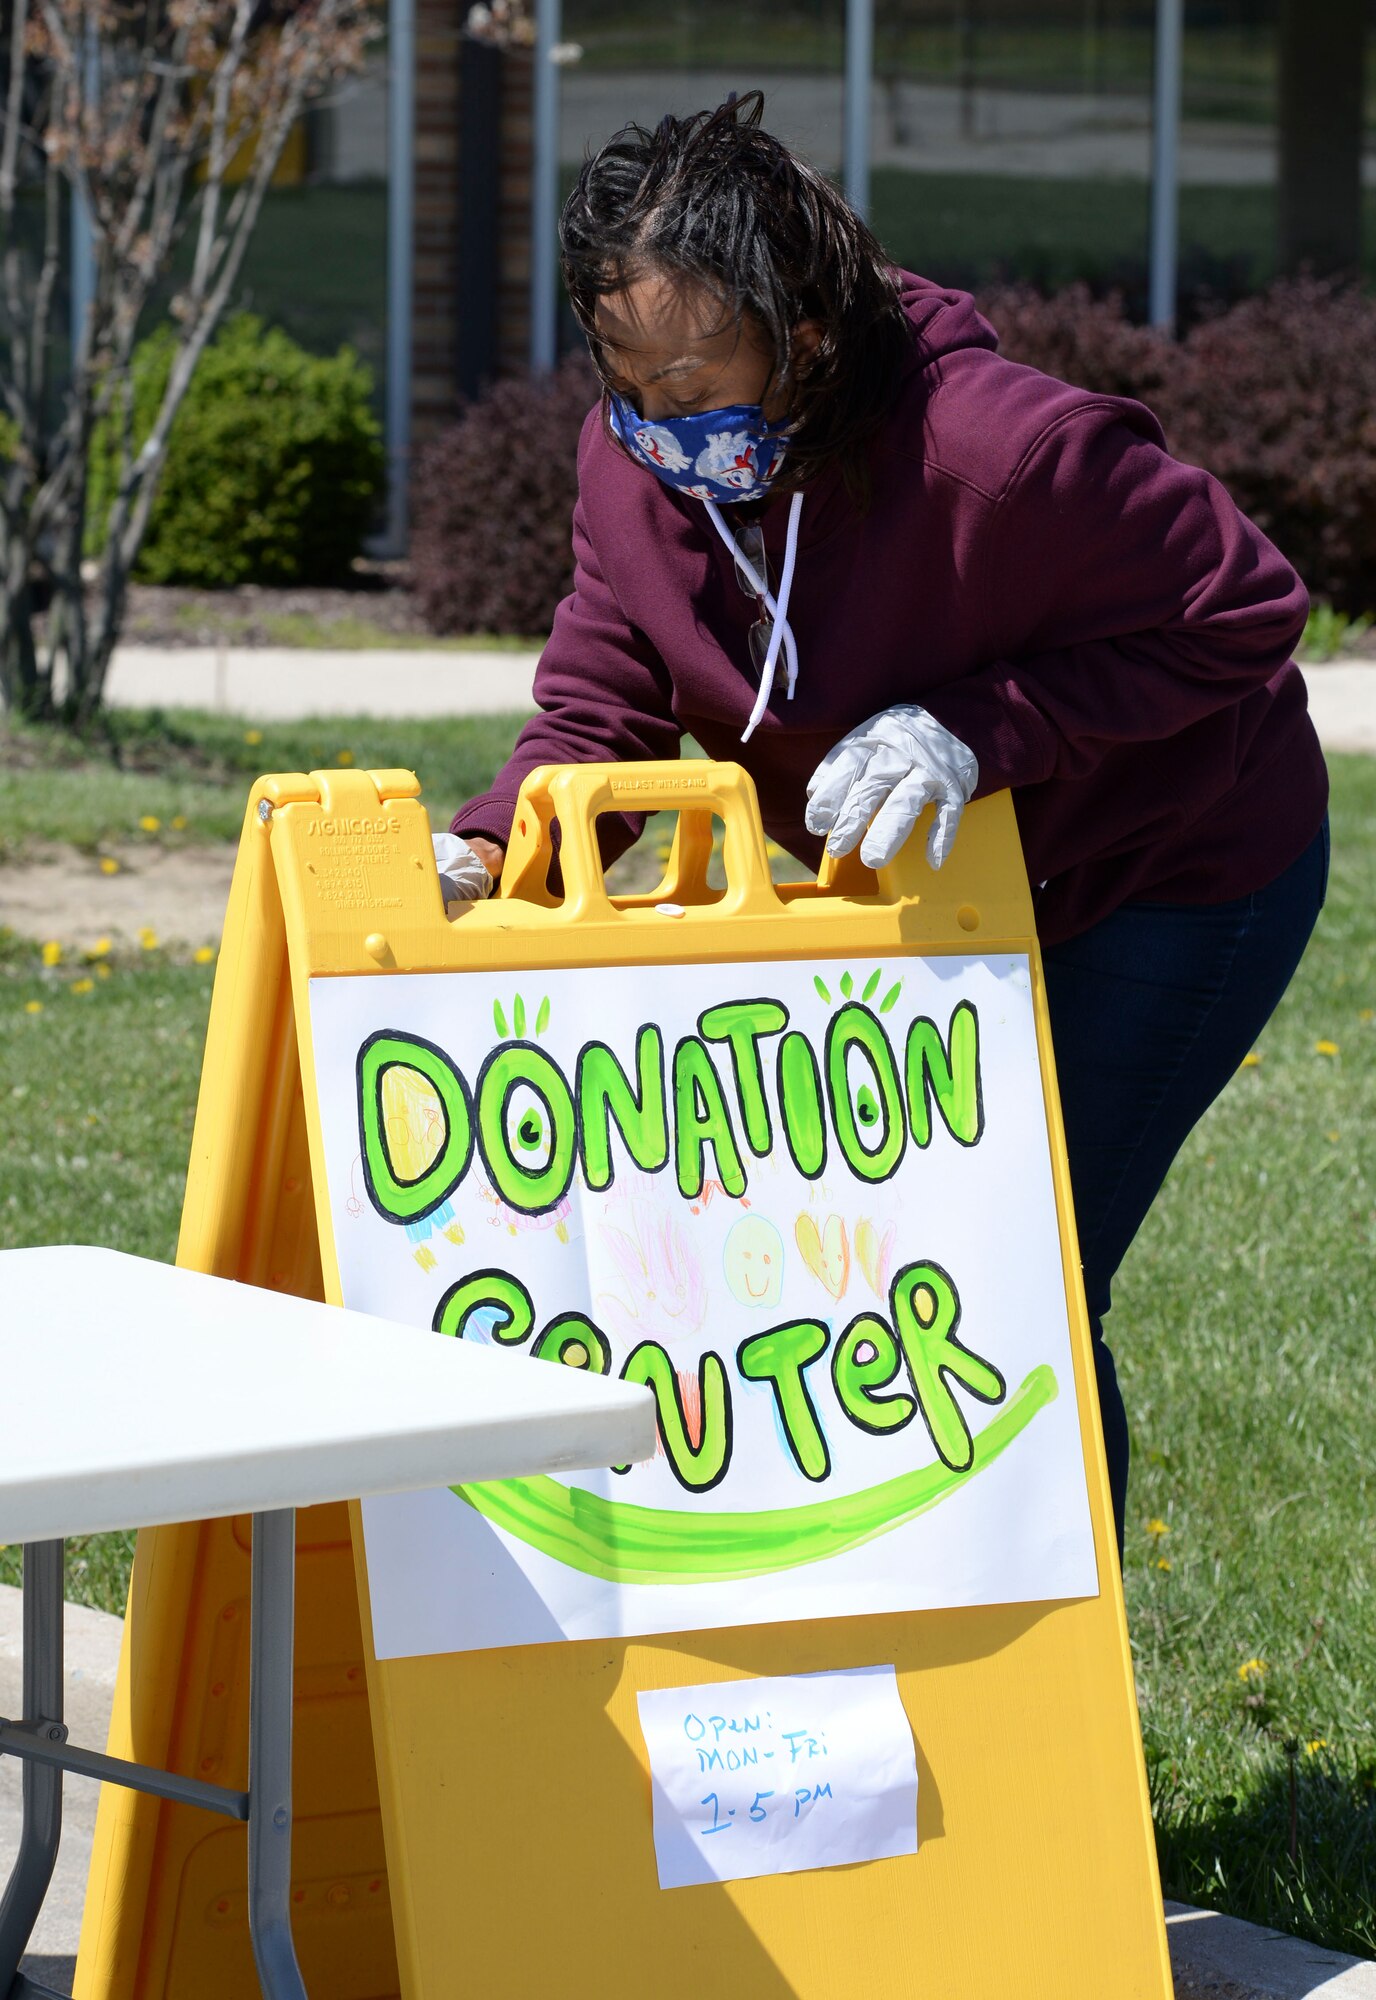 Bernadette Worsham, 88th Air Base Wing donation coordinator, sets up a sign for the 88th Air Base Wing’s donation drop off point outside the chapel located in the Prairies housing area at Wright-Patterson Air Force Base, Ohio, April 21, 2020. The center is open Monday-Friday between 1 and 5 p.m. (U.S. Air Force photo/Wesley Farnsworth)